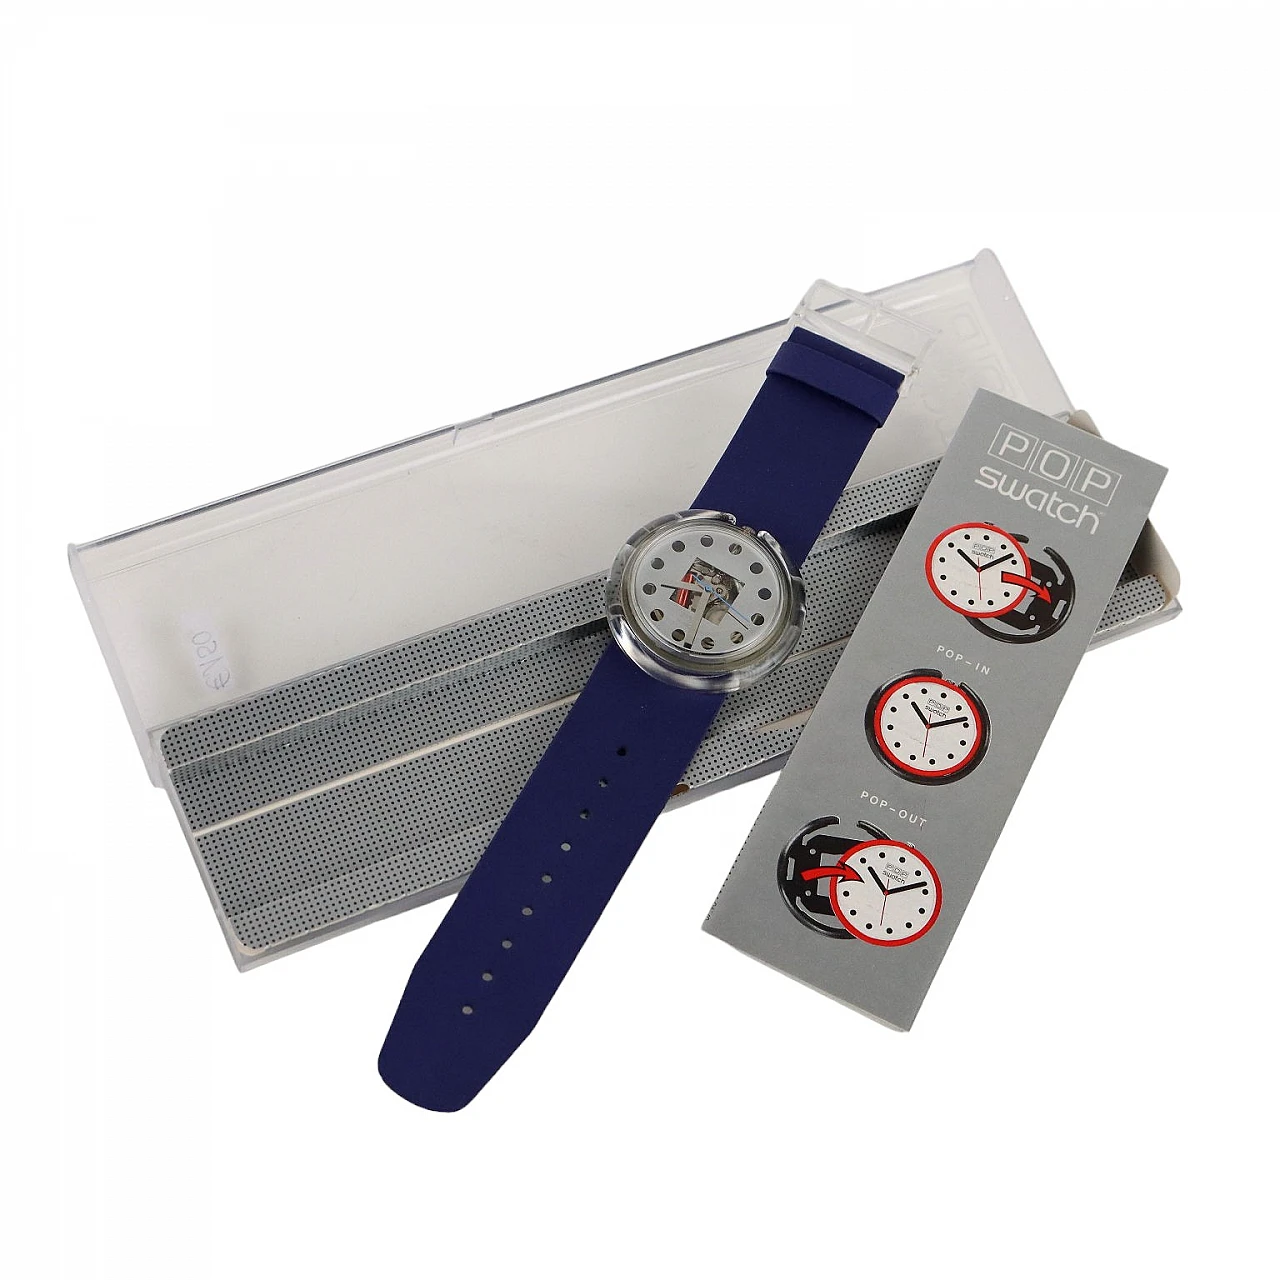 Swatch Pop PW144 Legal Blue water resistant, 1990 1